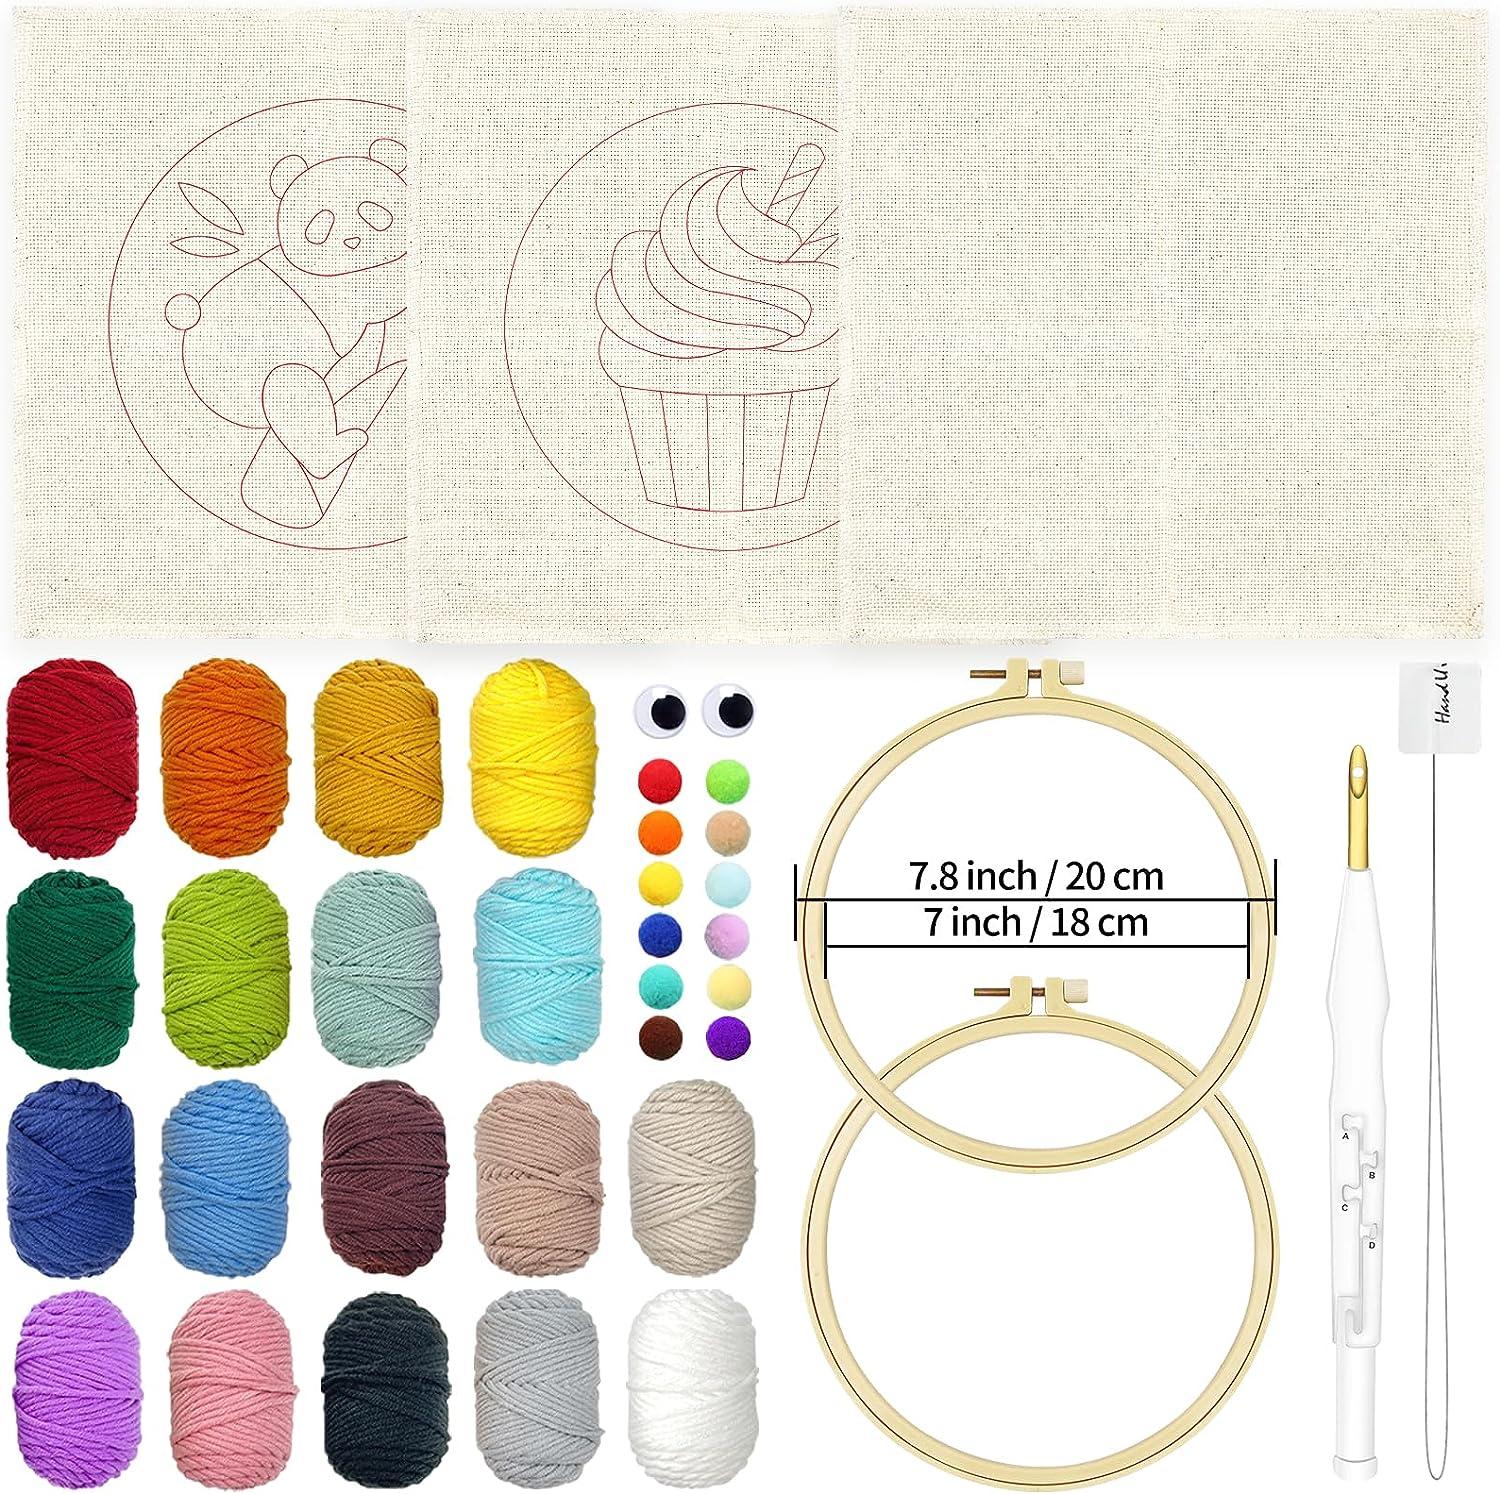 Wool Queen Punch Needle Beginner DIY Kit, 1 Punch Tool /18 Colors Yarn/Two 8.4'' Imitated Wood Hoops & Monk's Cloth and 5 Design Patterns for Kids